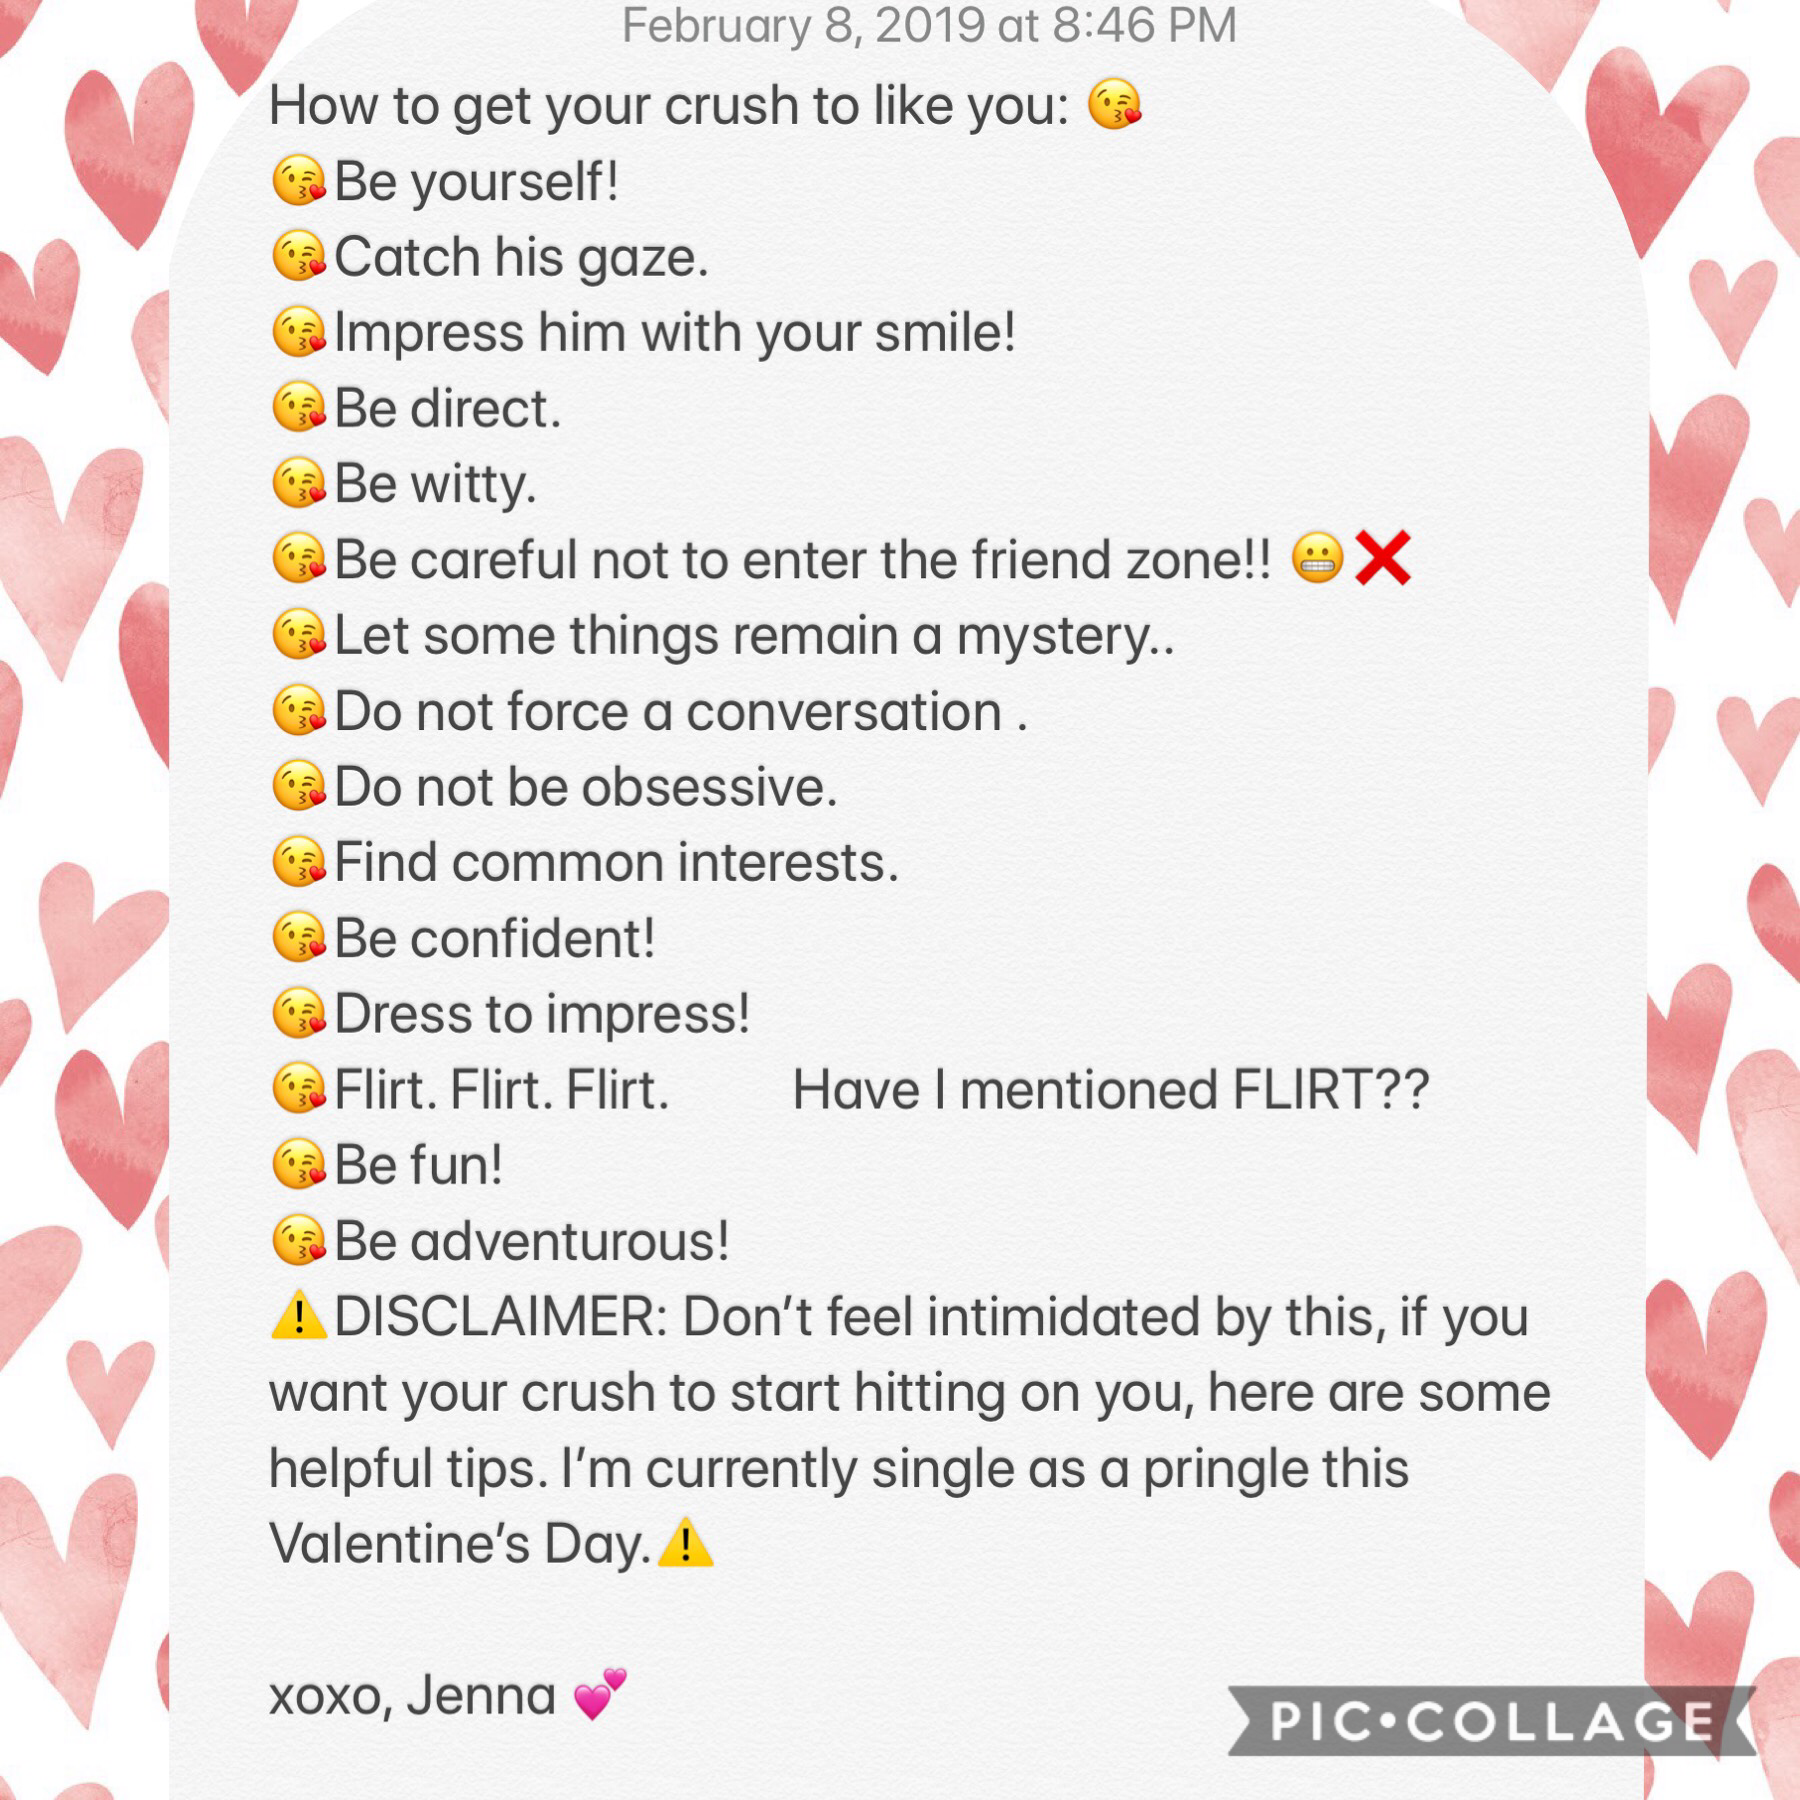 💝Tap!💝

⚠️PLEASE READ THE DISCLAIMER BEFORE LOOKING AT THIS COLLAGE AND START GENERATING HATE!!!⚠️ Happy Friday!! 🤗🥳

QOTD: Single or taken? 💘 AOTD: Single as a pringle and NOT ready to mingle. 😂😉